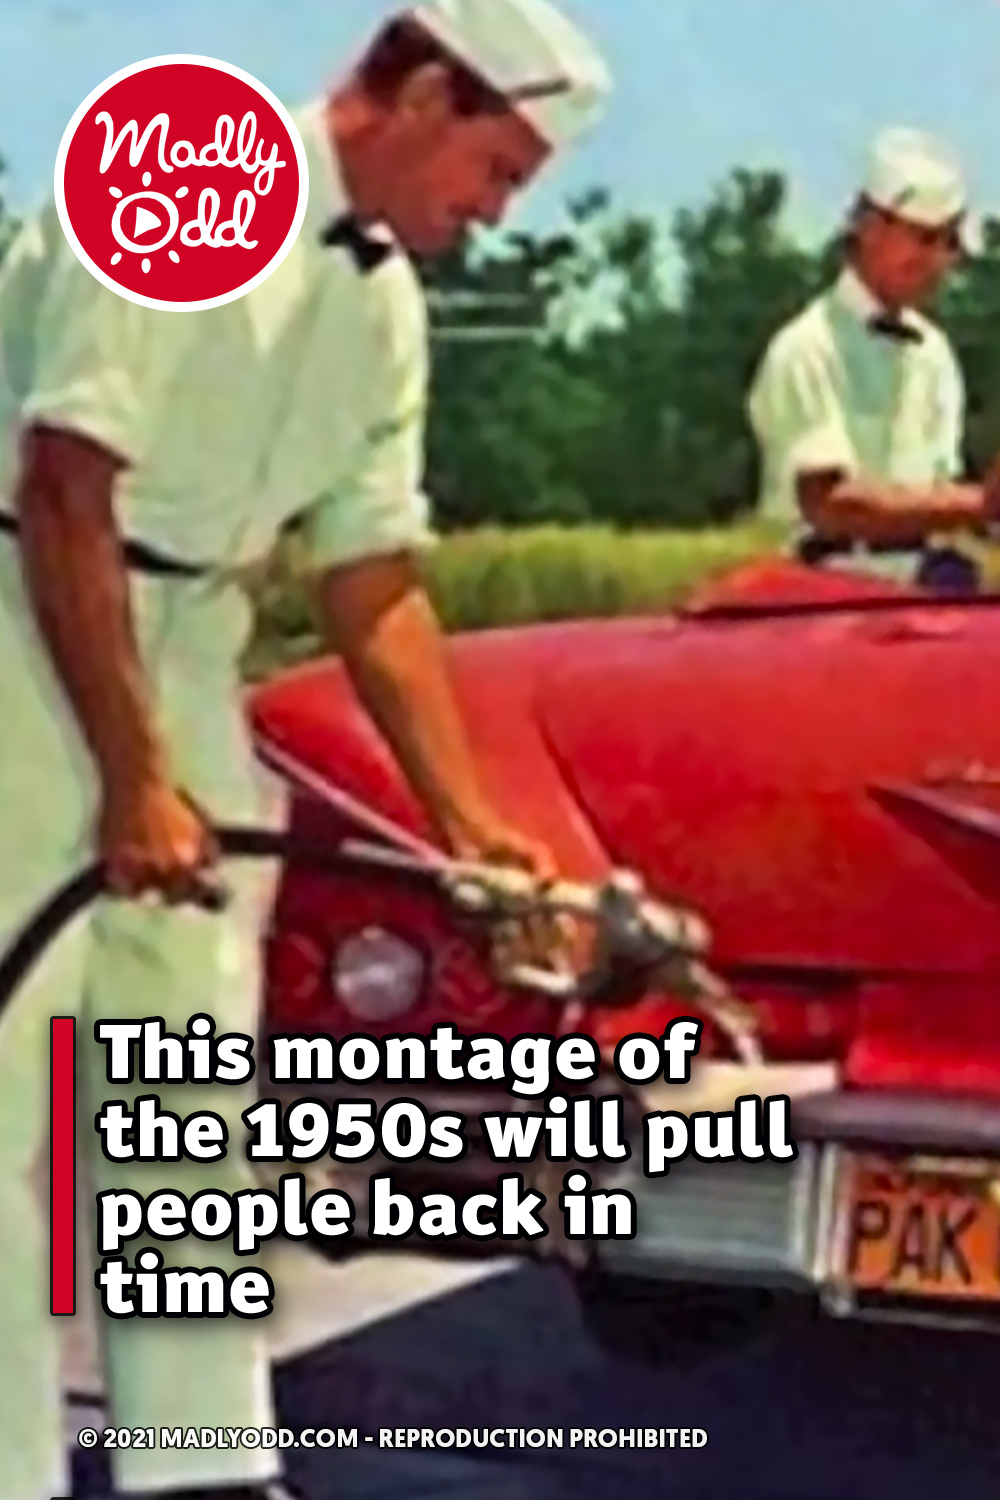 This montage of the 1950s will pull people back in time